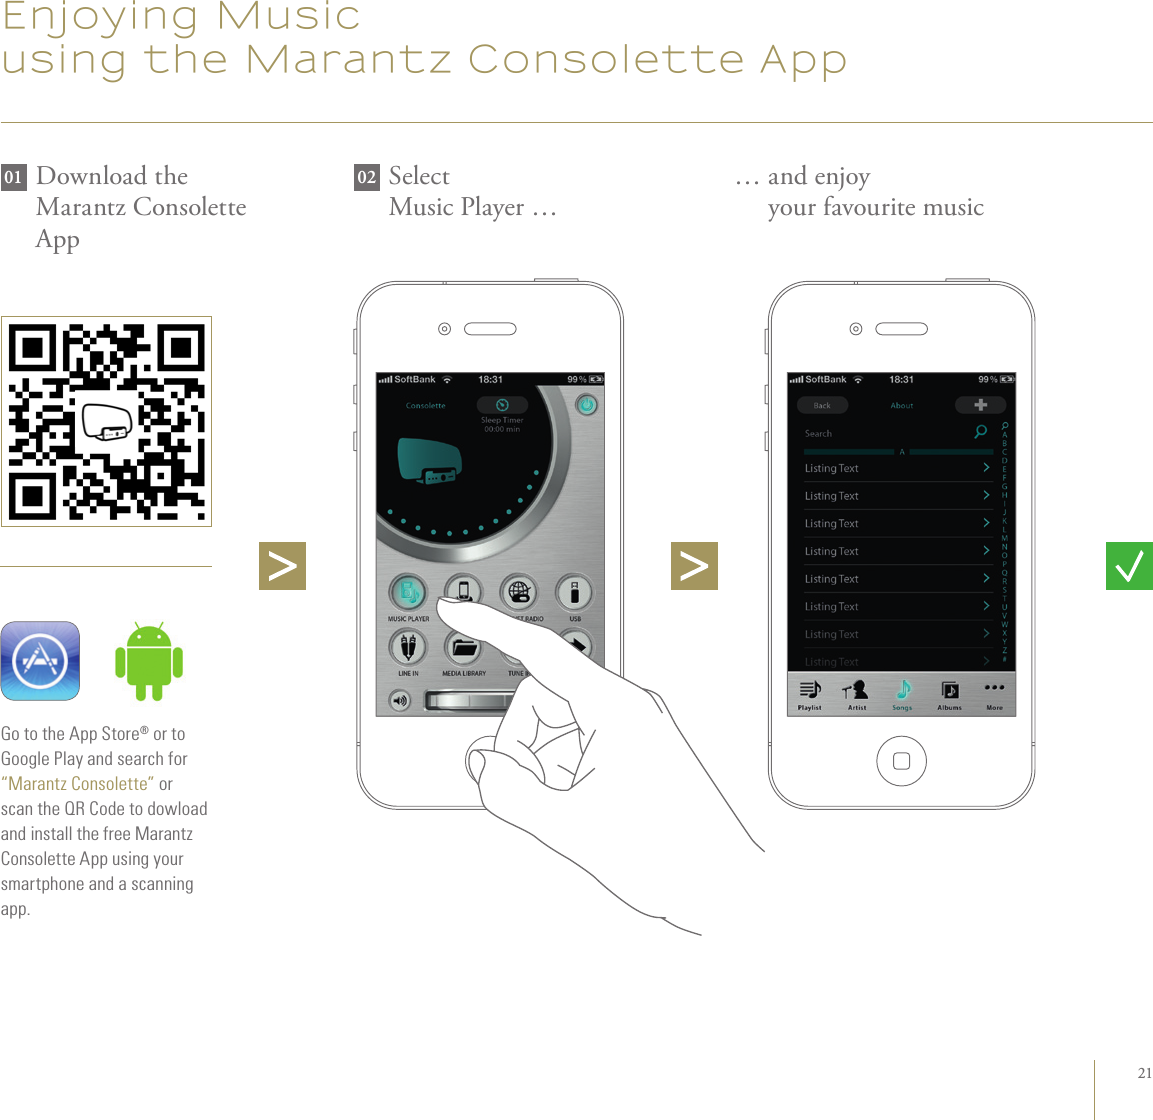 21Enjoying Music   using the Marantz Consolette App Download the  Marantz Consolette AppSelect  Music Player ……  and enjoy  your favourite musicGo to the App Store® or to Google Play and search for “Marantz Consolette” or scan the QR Code to dowload and install the free Marantz Consolette App using your smartphone and a scanning app.01 02